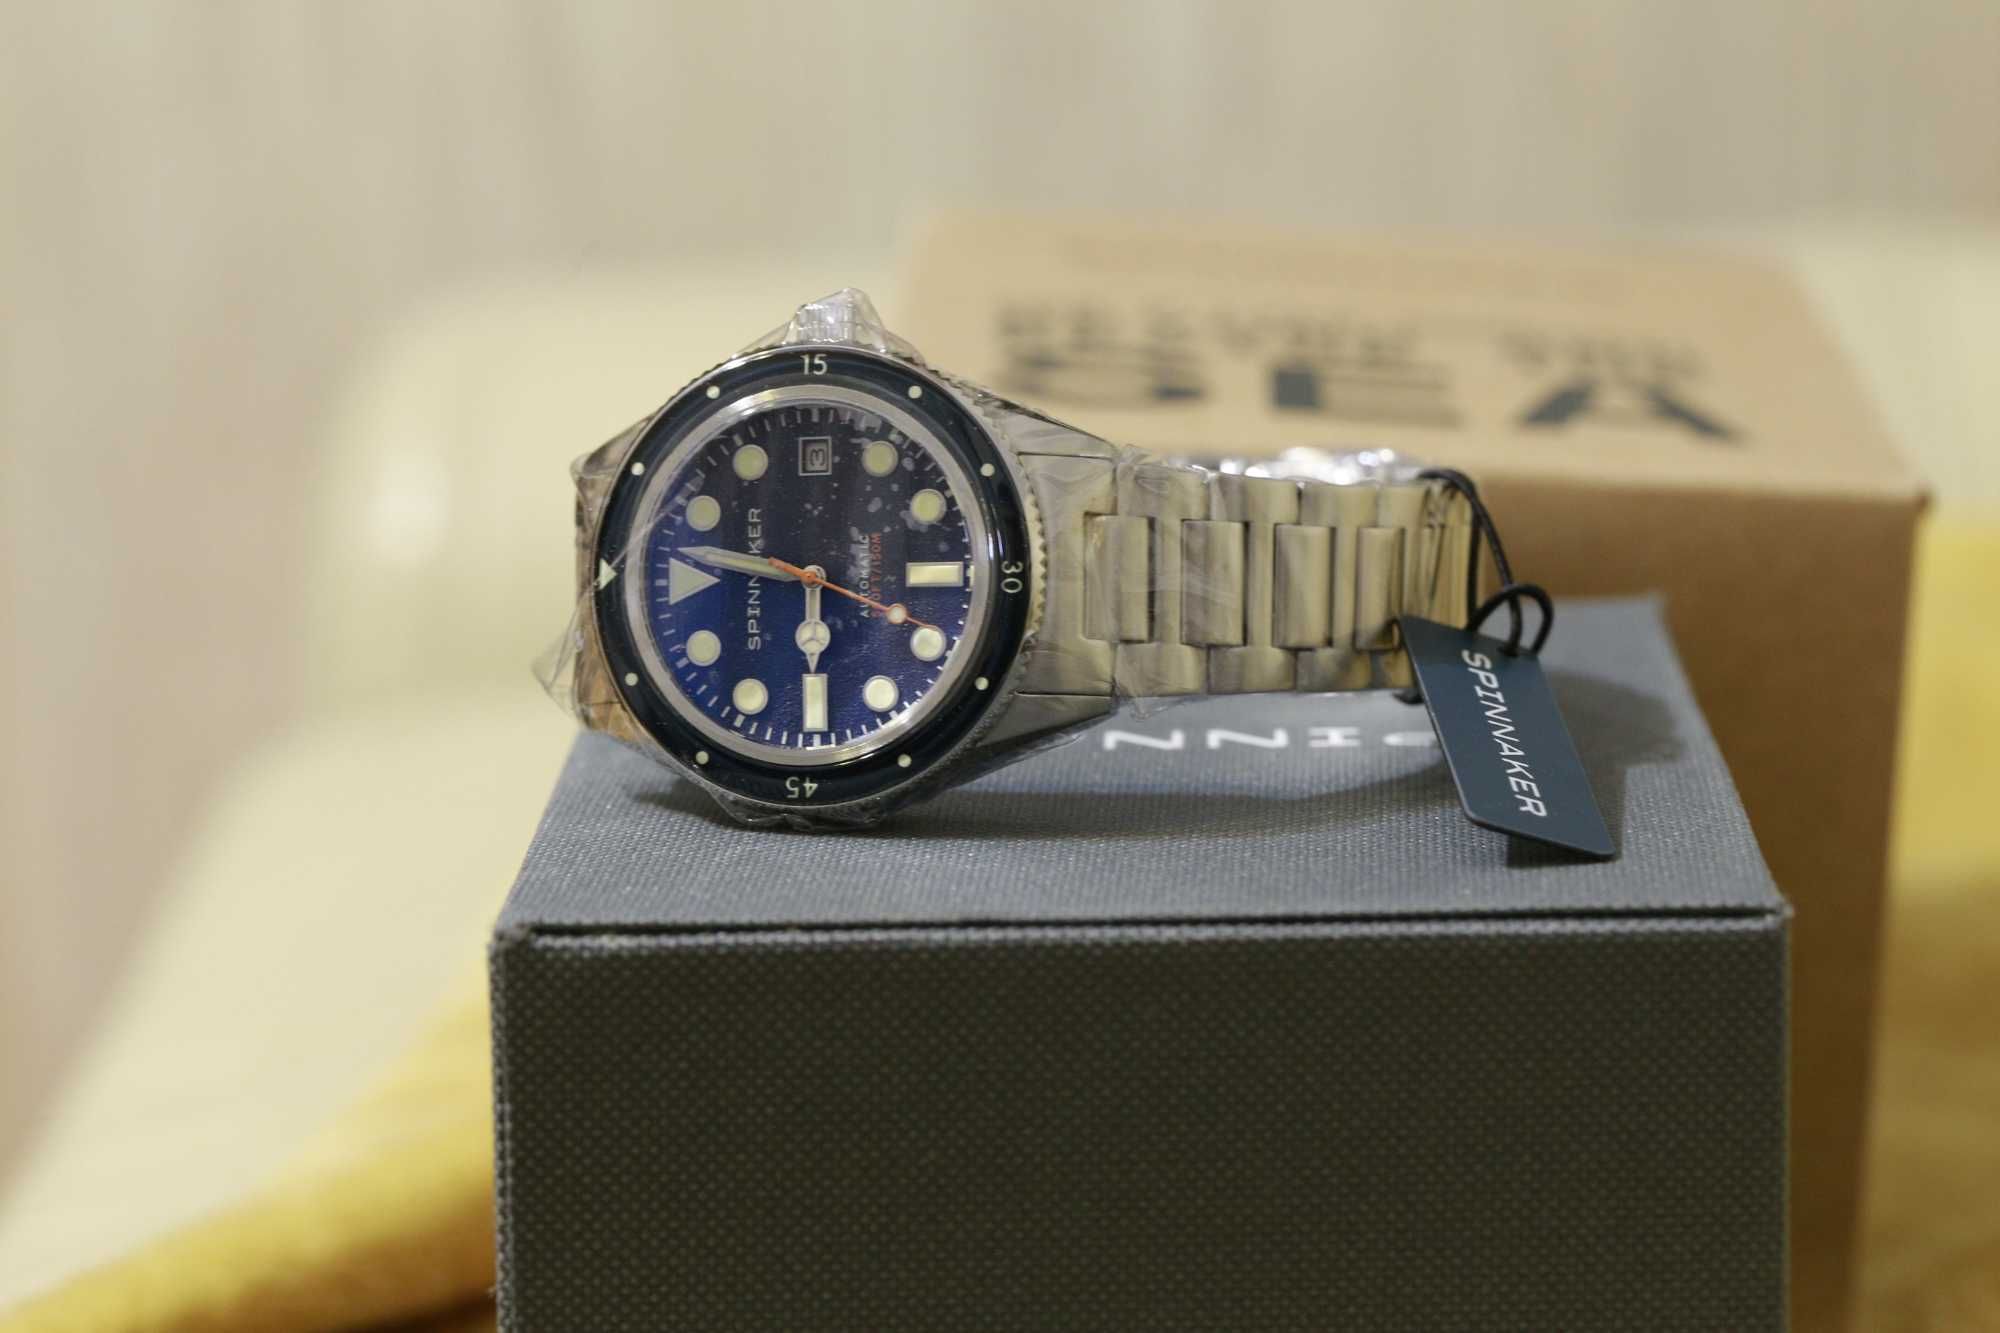 Zegarek Spinnaker Cahill Mid-size Automatic
Admiral Blue Nowy